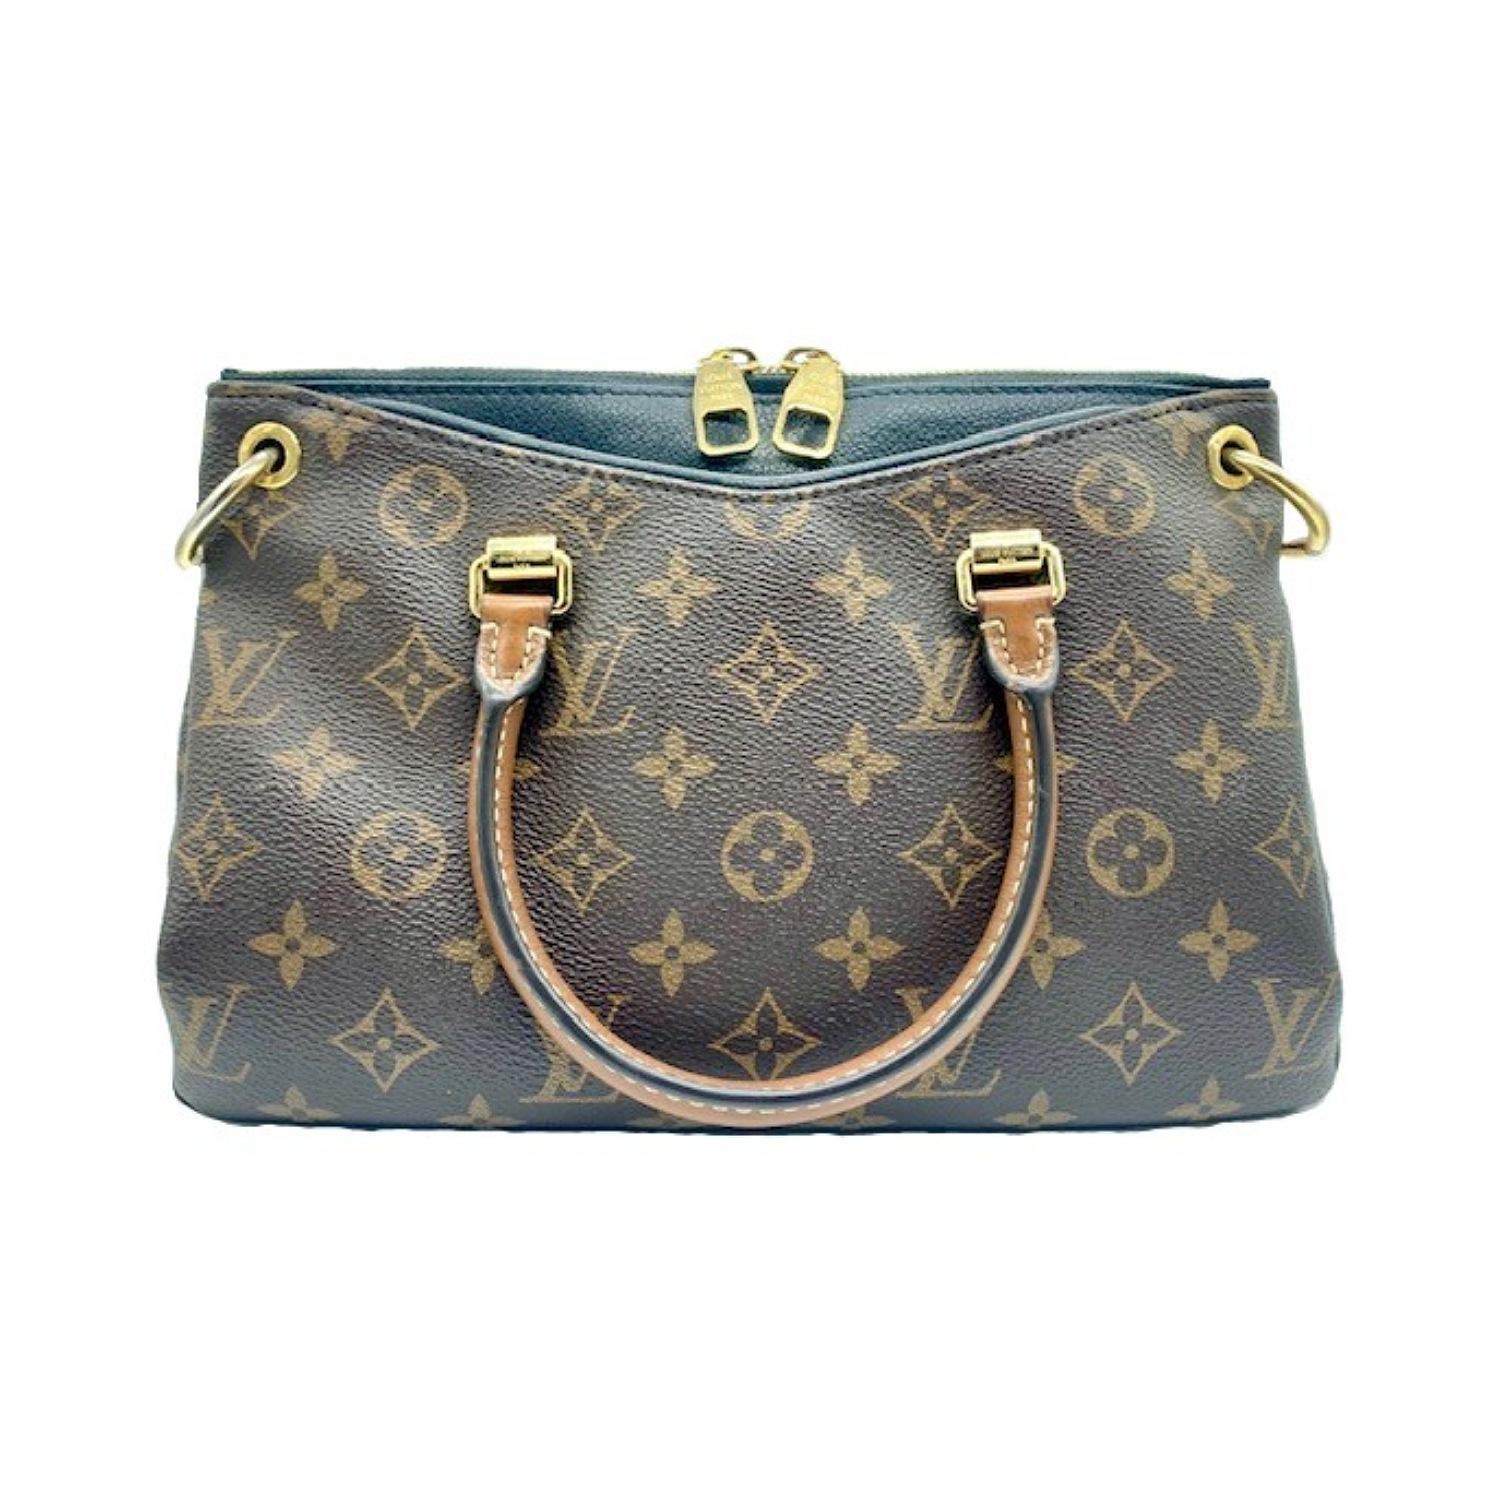 With its touch of color and contemporary cross-body carry perfectly designed for women on the go, the Pallas BB bag offers flawless functionality and modern panache. Elevate your style status. Retail $2,260.

Designer: Louis Vuitton
Material: Coated